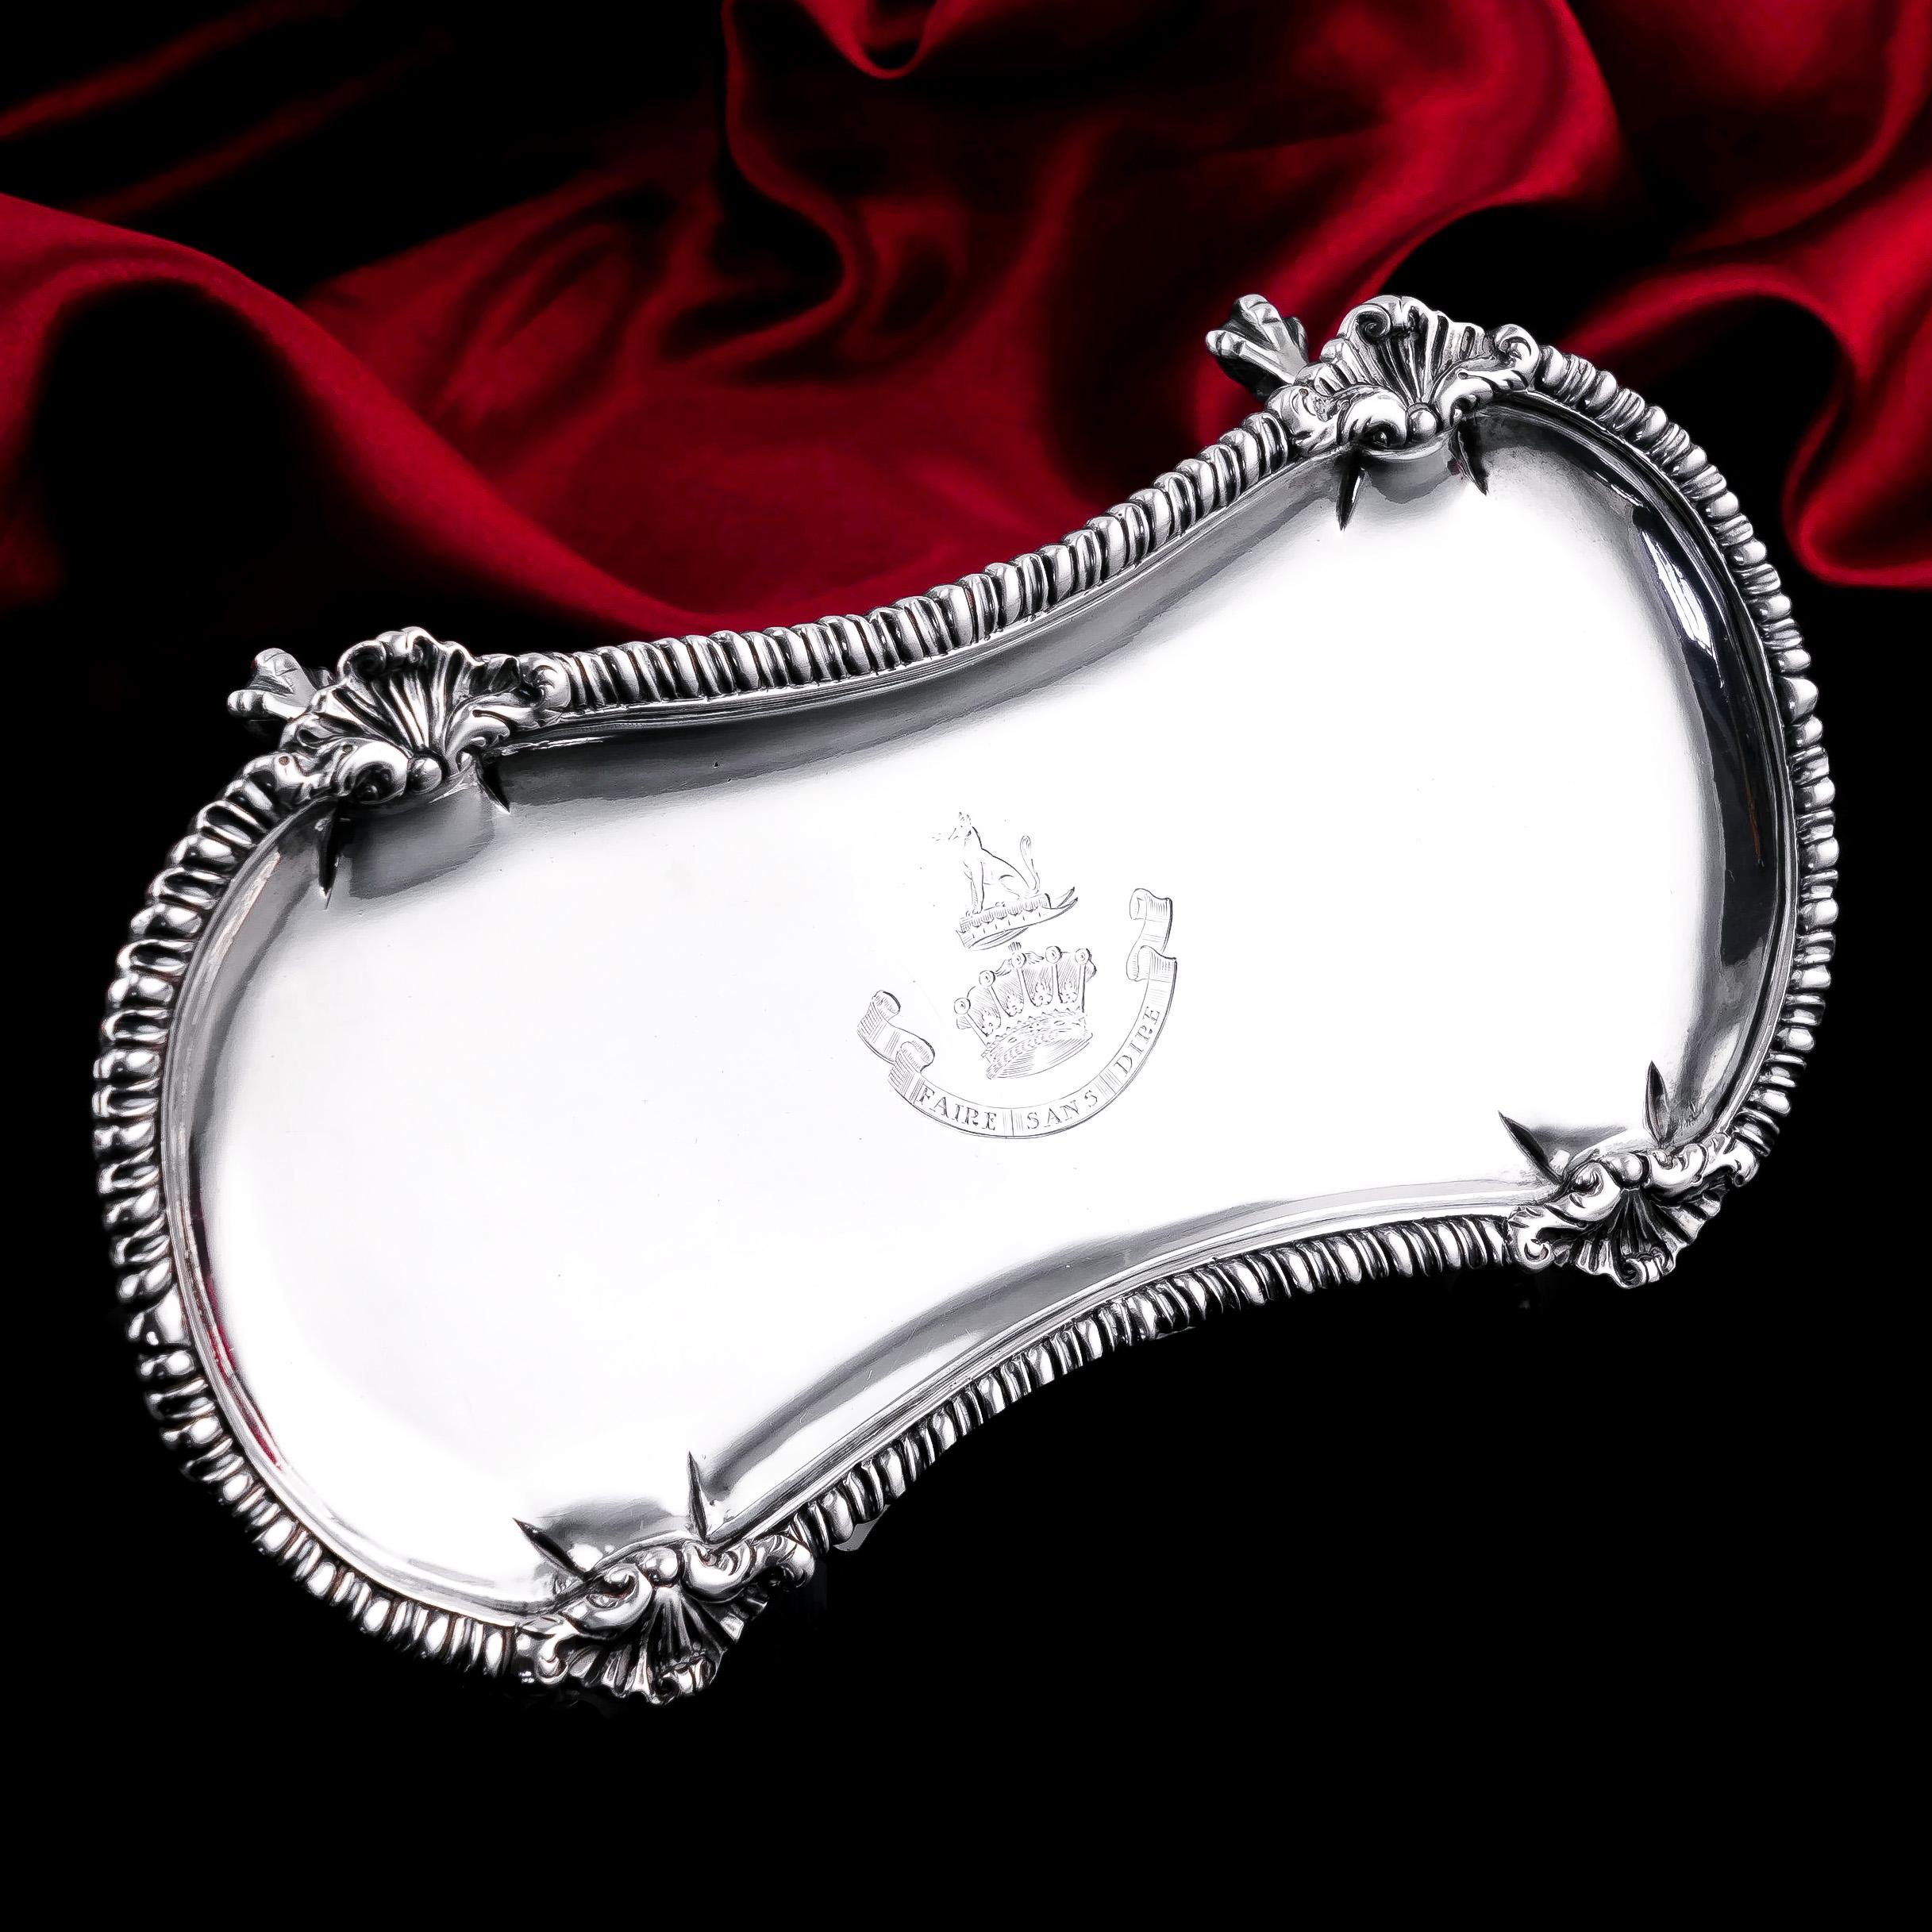 We are delighted to be able to offer this wonderful solid silver snuffer tray made by Henry Hallsworth in London, 1774.
 
Featuring traditional Georgian decorations, this tray presents a wonderful hourglass shape accented with a gadrooned border